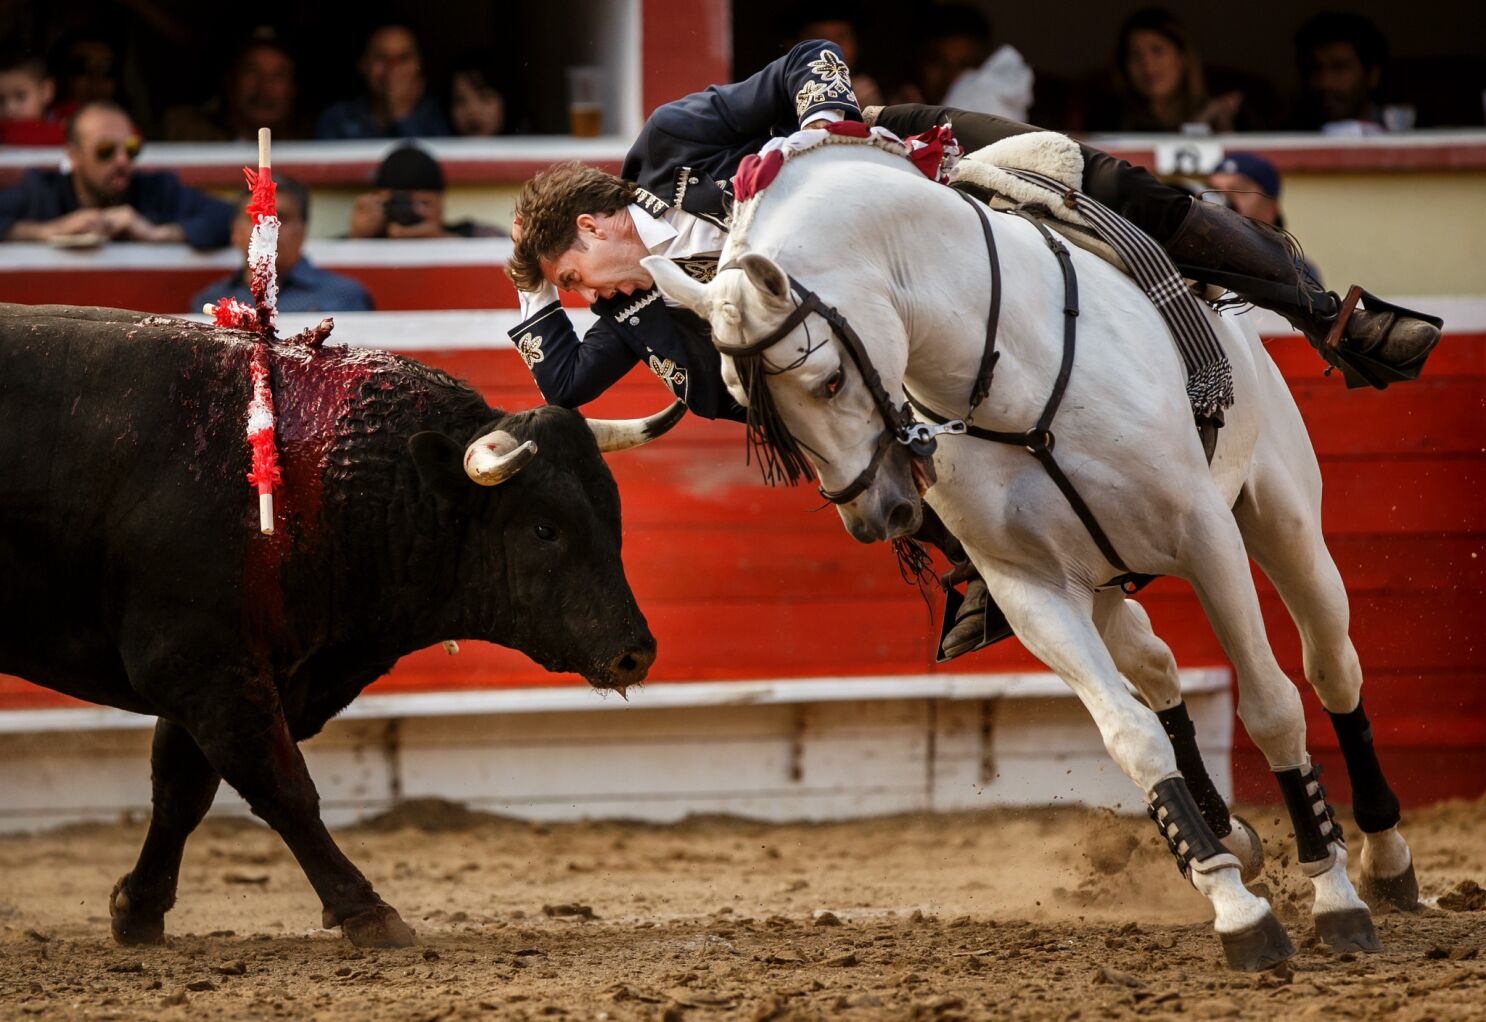 Bullfighting as an 'art form'? More like a barbaric act of animal cruelty -  Los Angeles Times